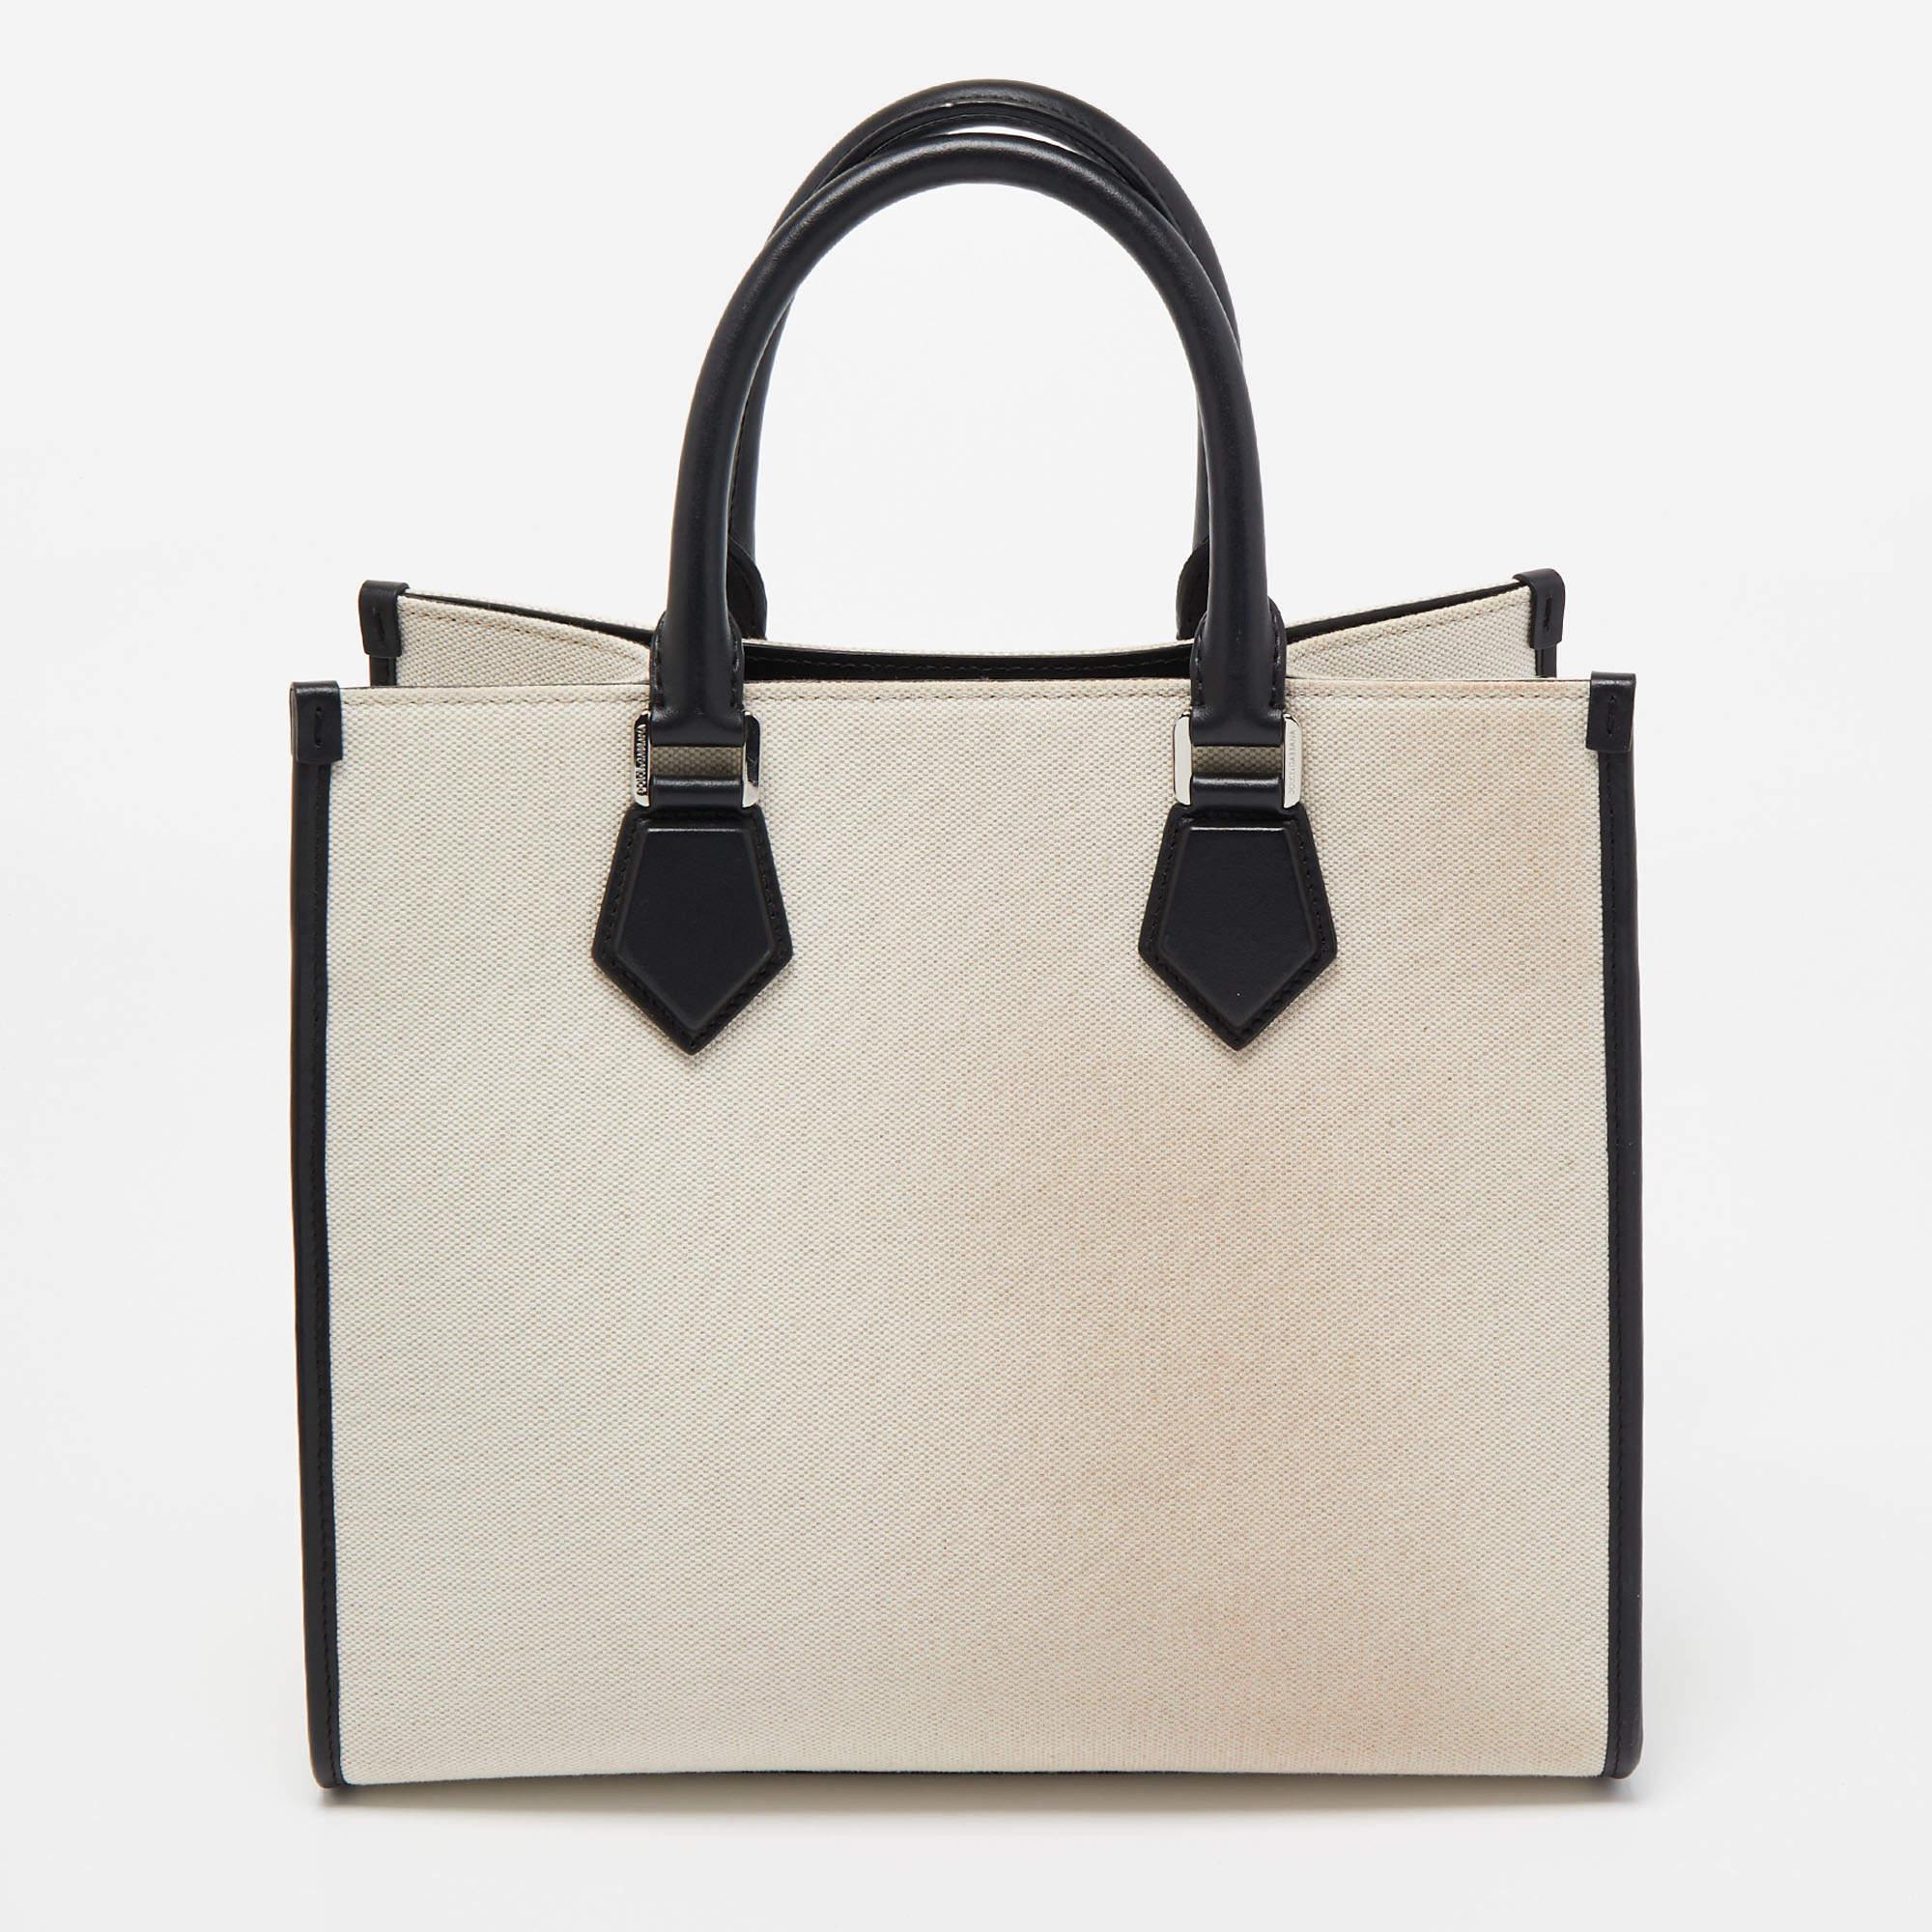 Do you know what would be the perfect bag to swing for your daily errands or sprees? This one here from Dolce & Gabbana. It is perfect! Crafted from off-white and black leather, the bag has a lovely shape, two leather handles, and a spacious